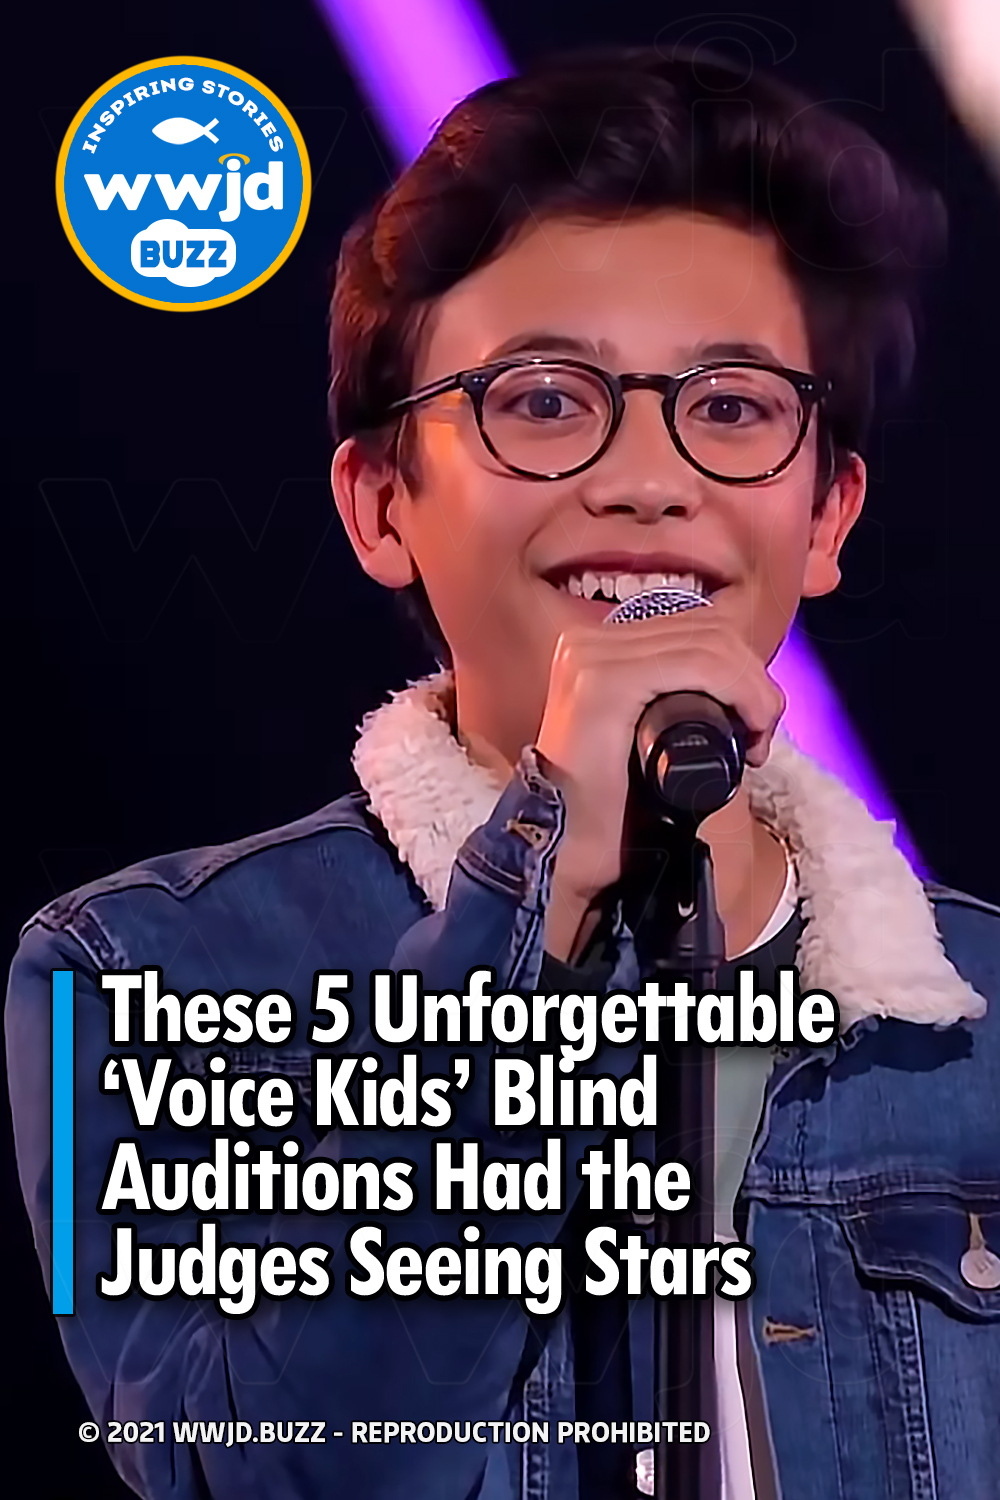 These 5 Unforgettable ‘Voice Kids’ Blind Auditions Had the Judges Seeing Stars